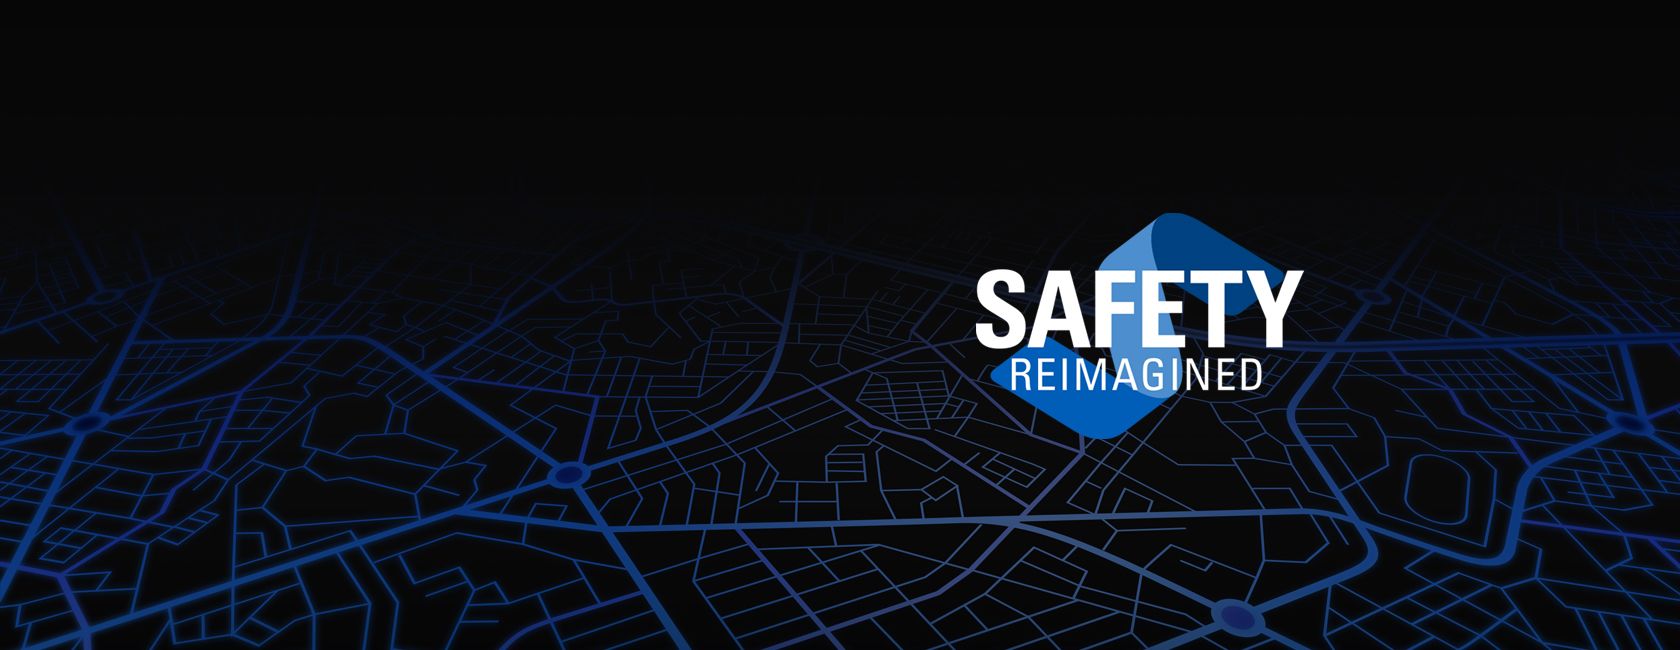 SAFETY REIMAGINED